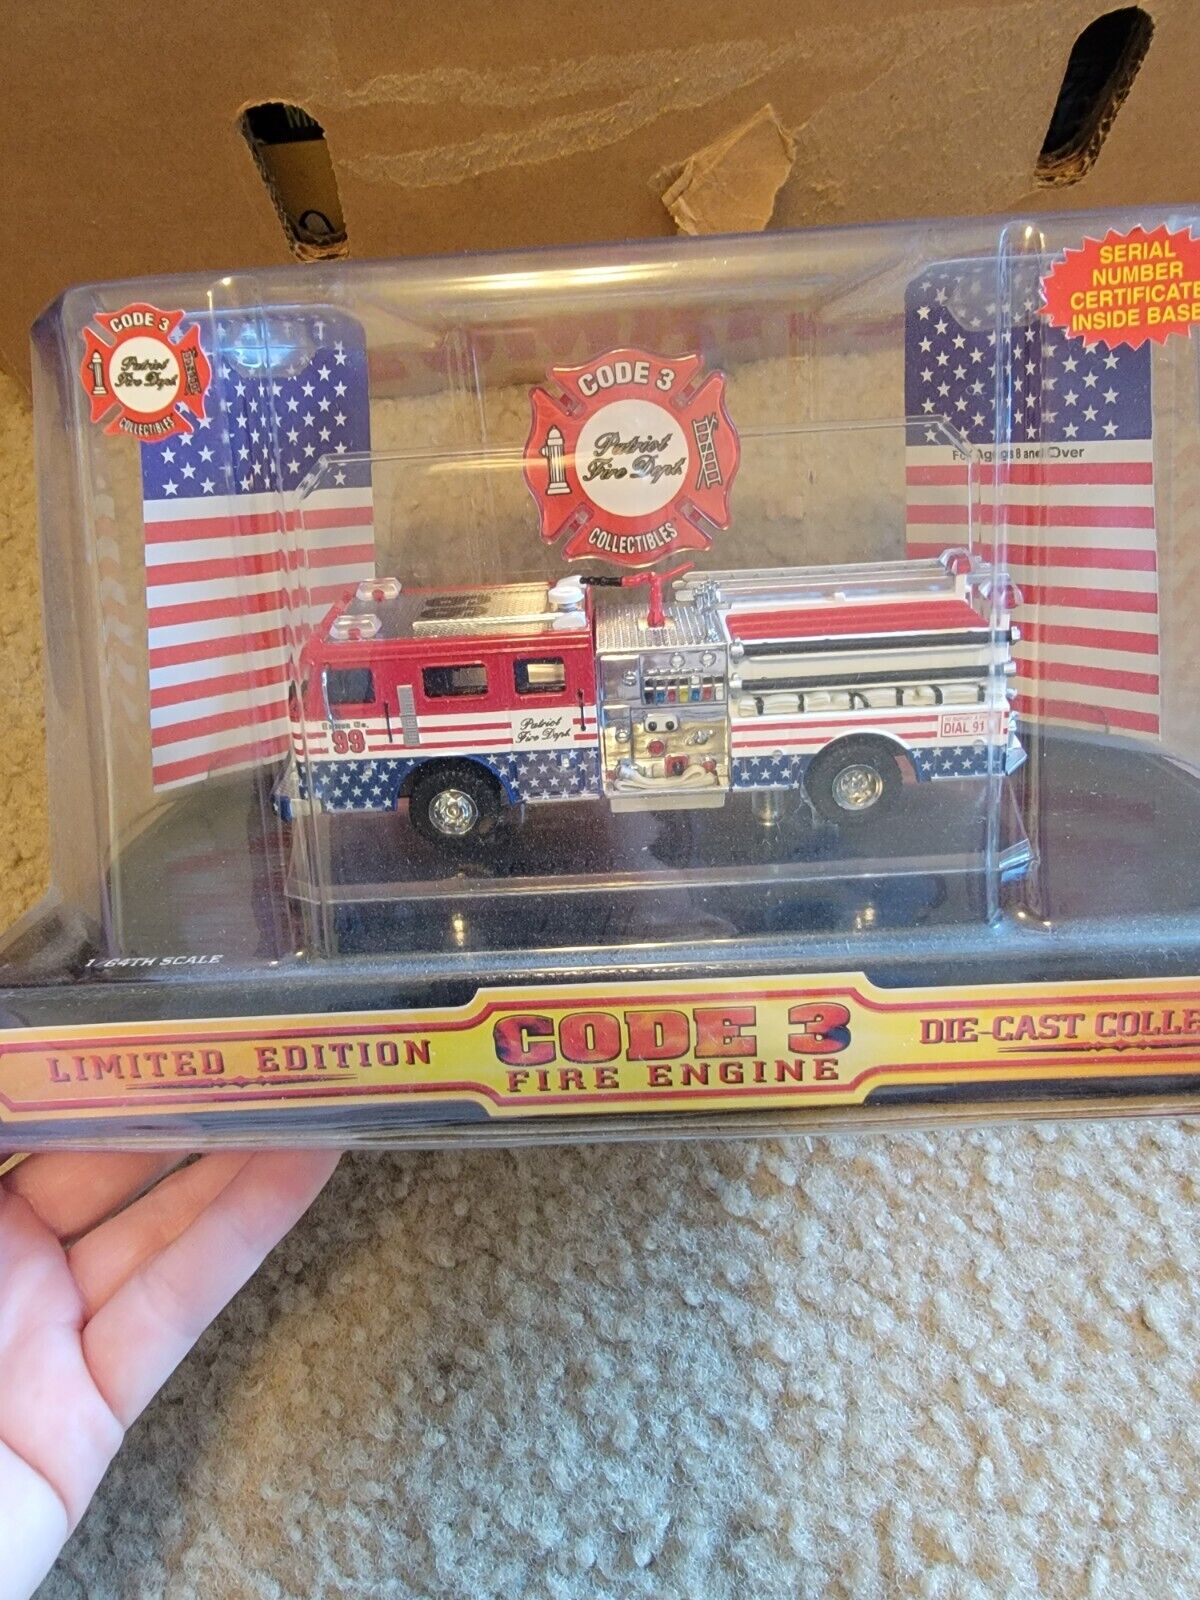 Code 3 Fire Engine Collectible